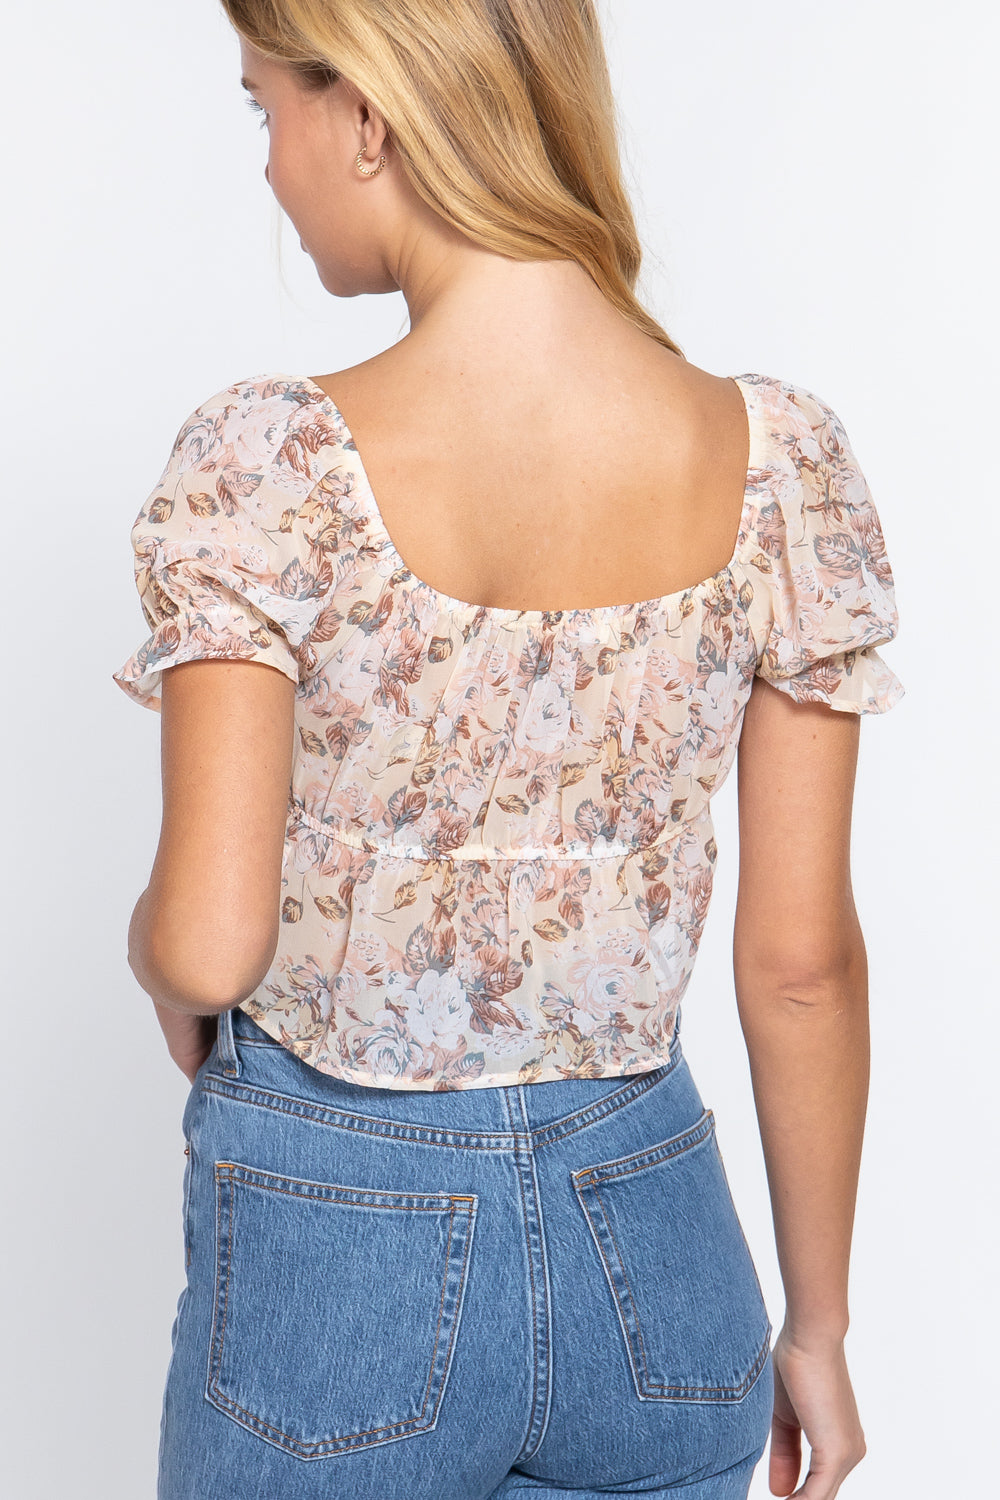 Short Sleeve Front Tie Floral Print Woven Top - Tigbul's Fashion